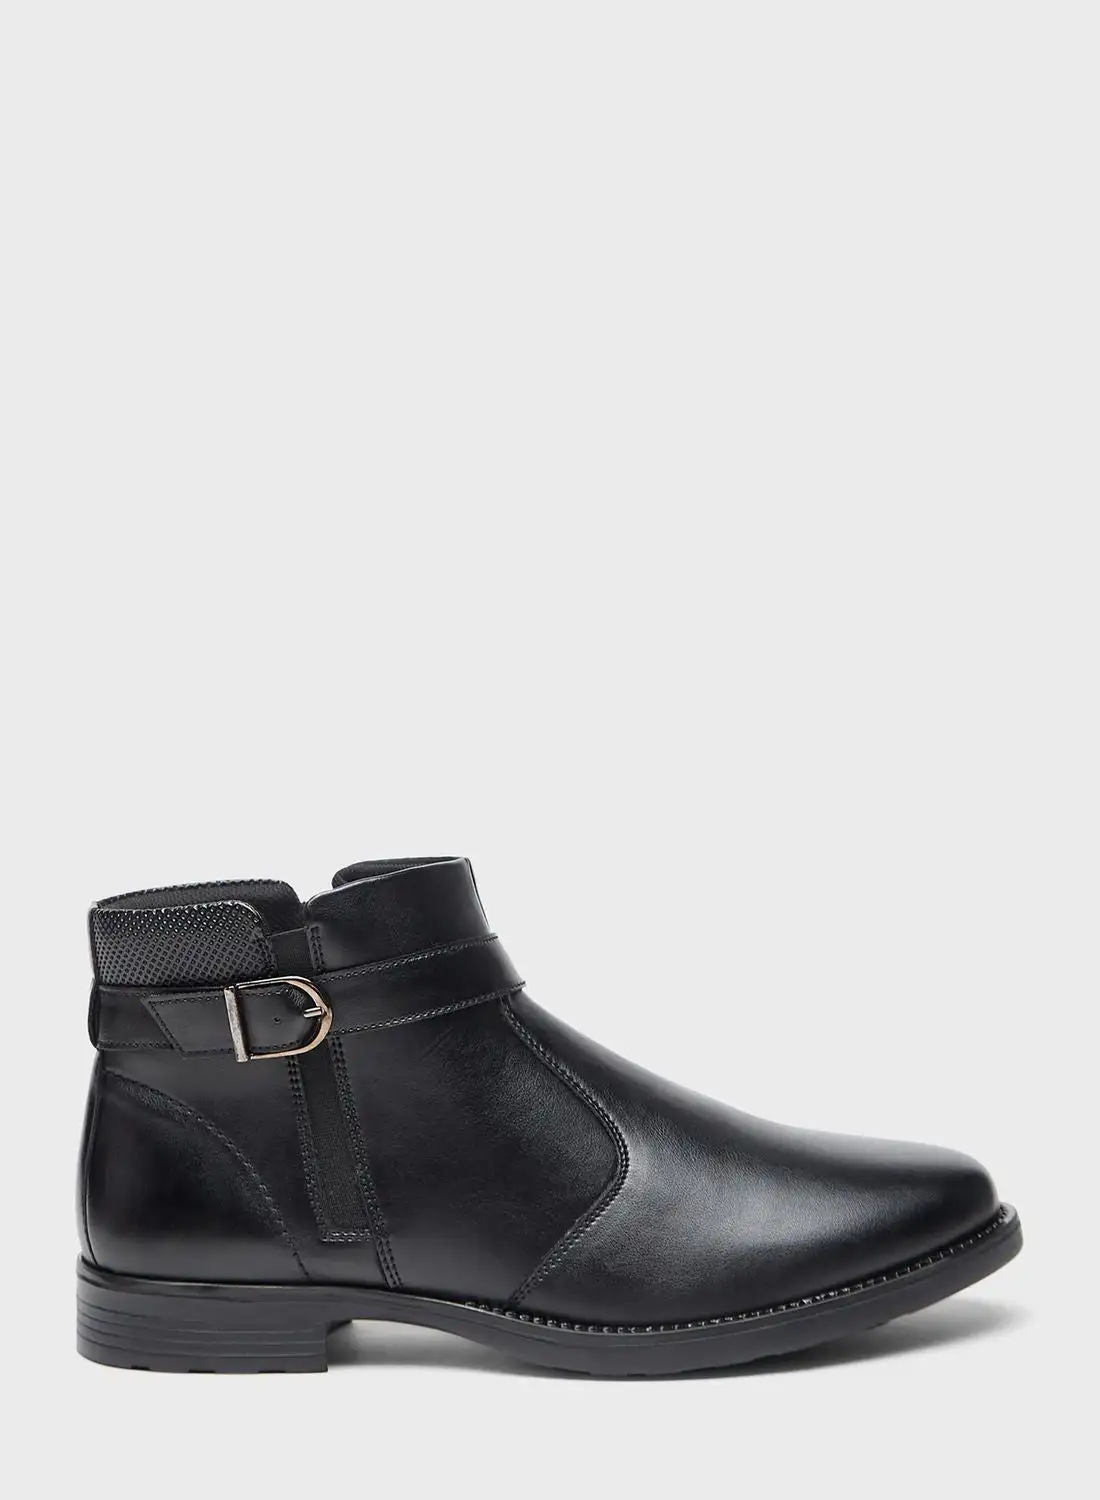 LBL by Shoexpress Formal Boot